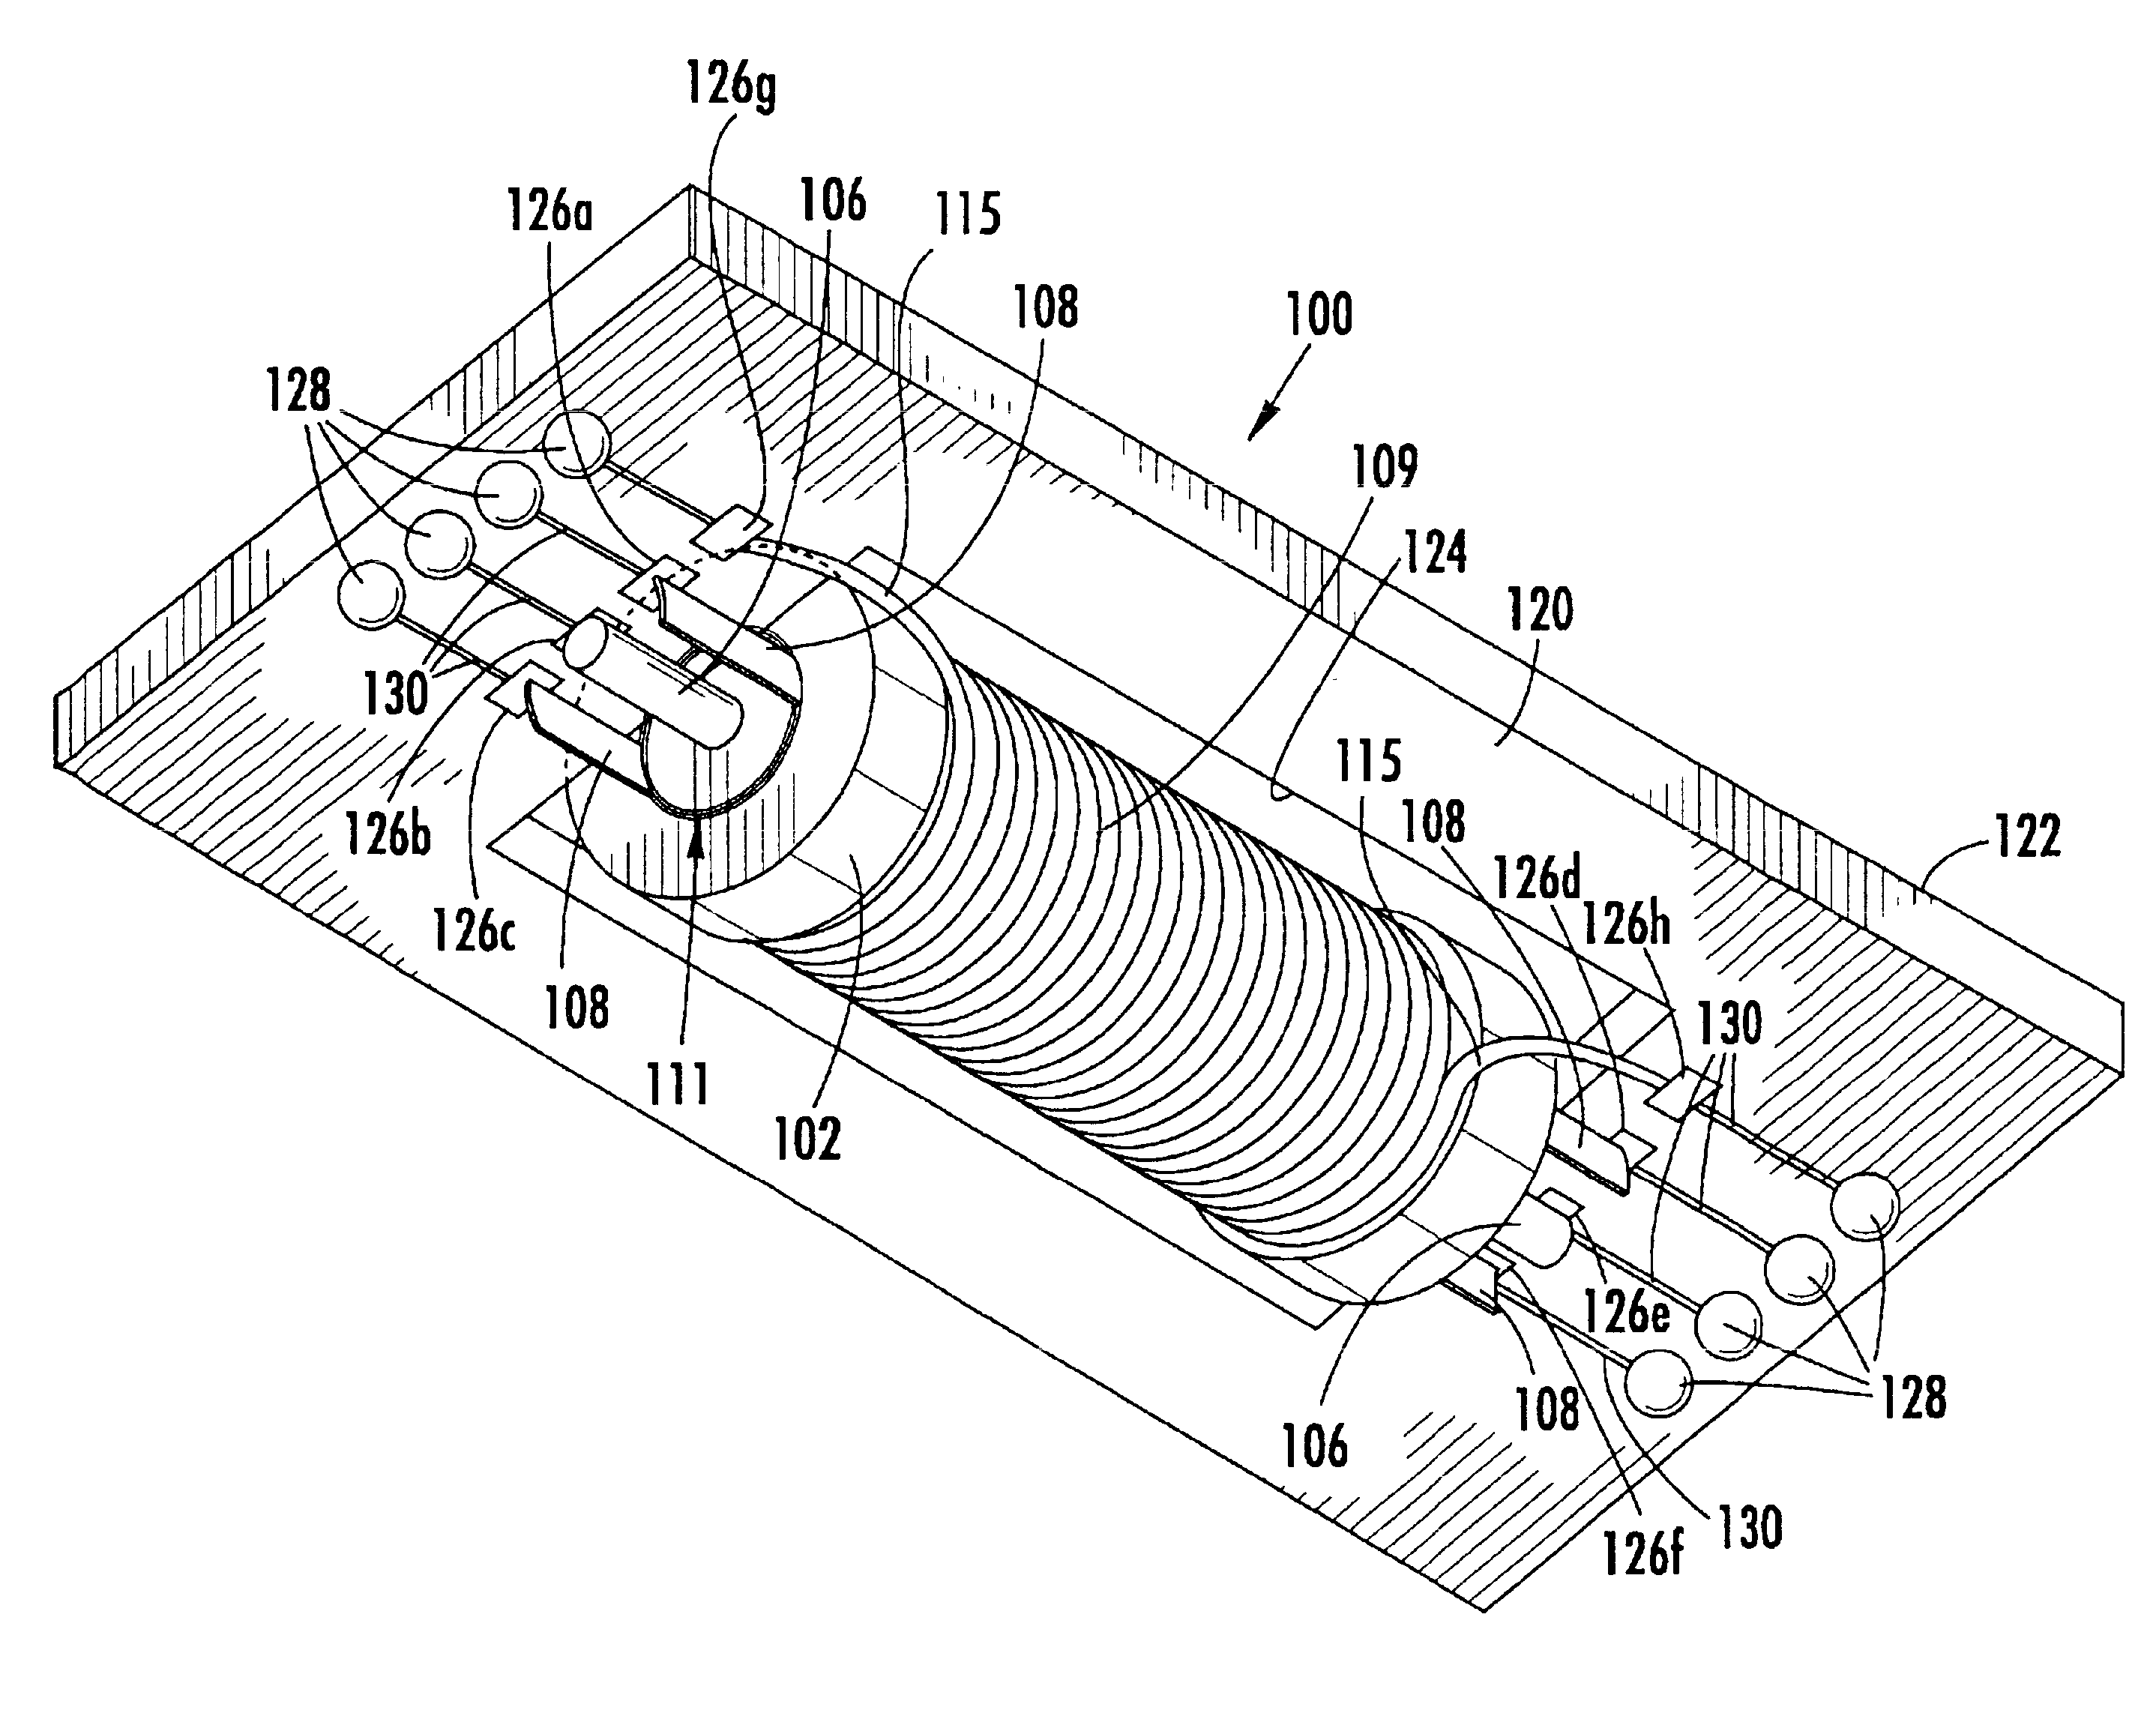 Inverted board mounted electromechanical device